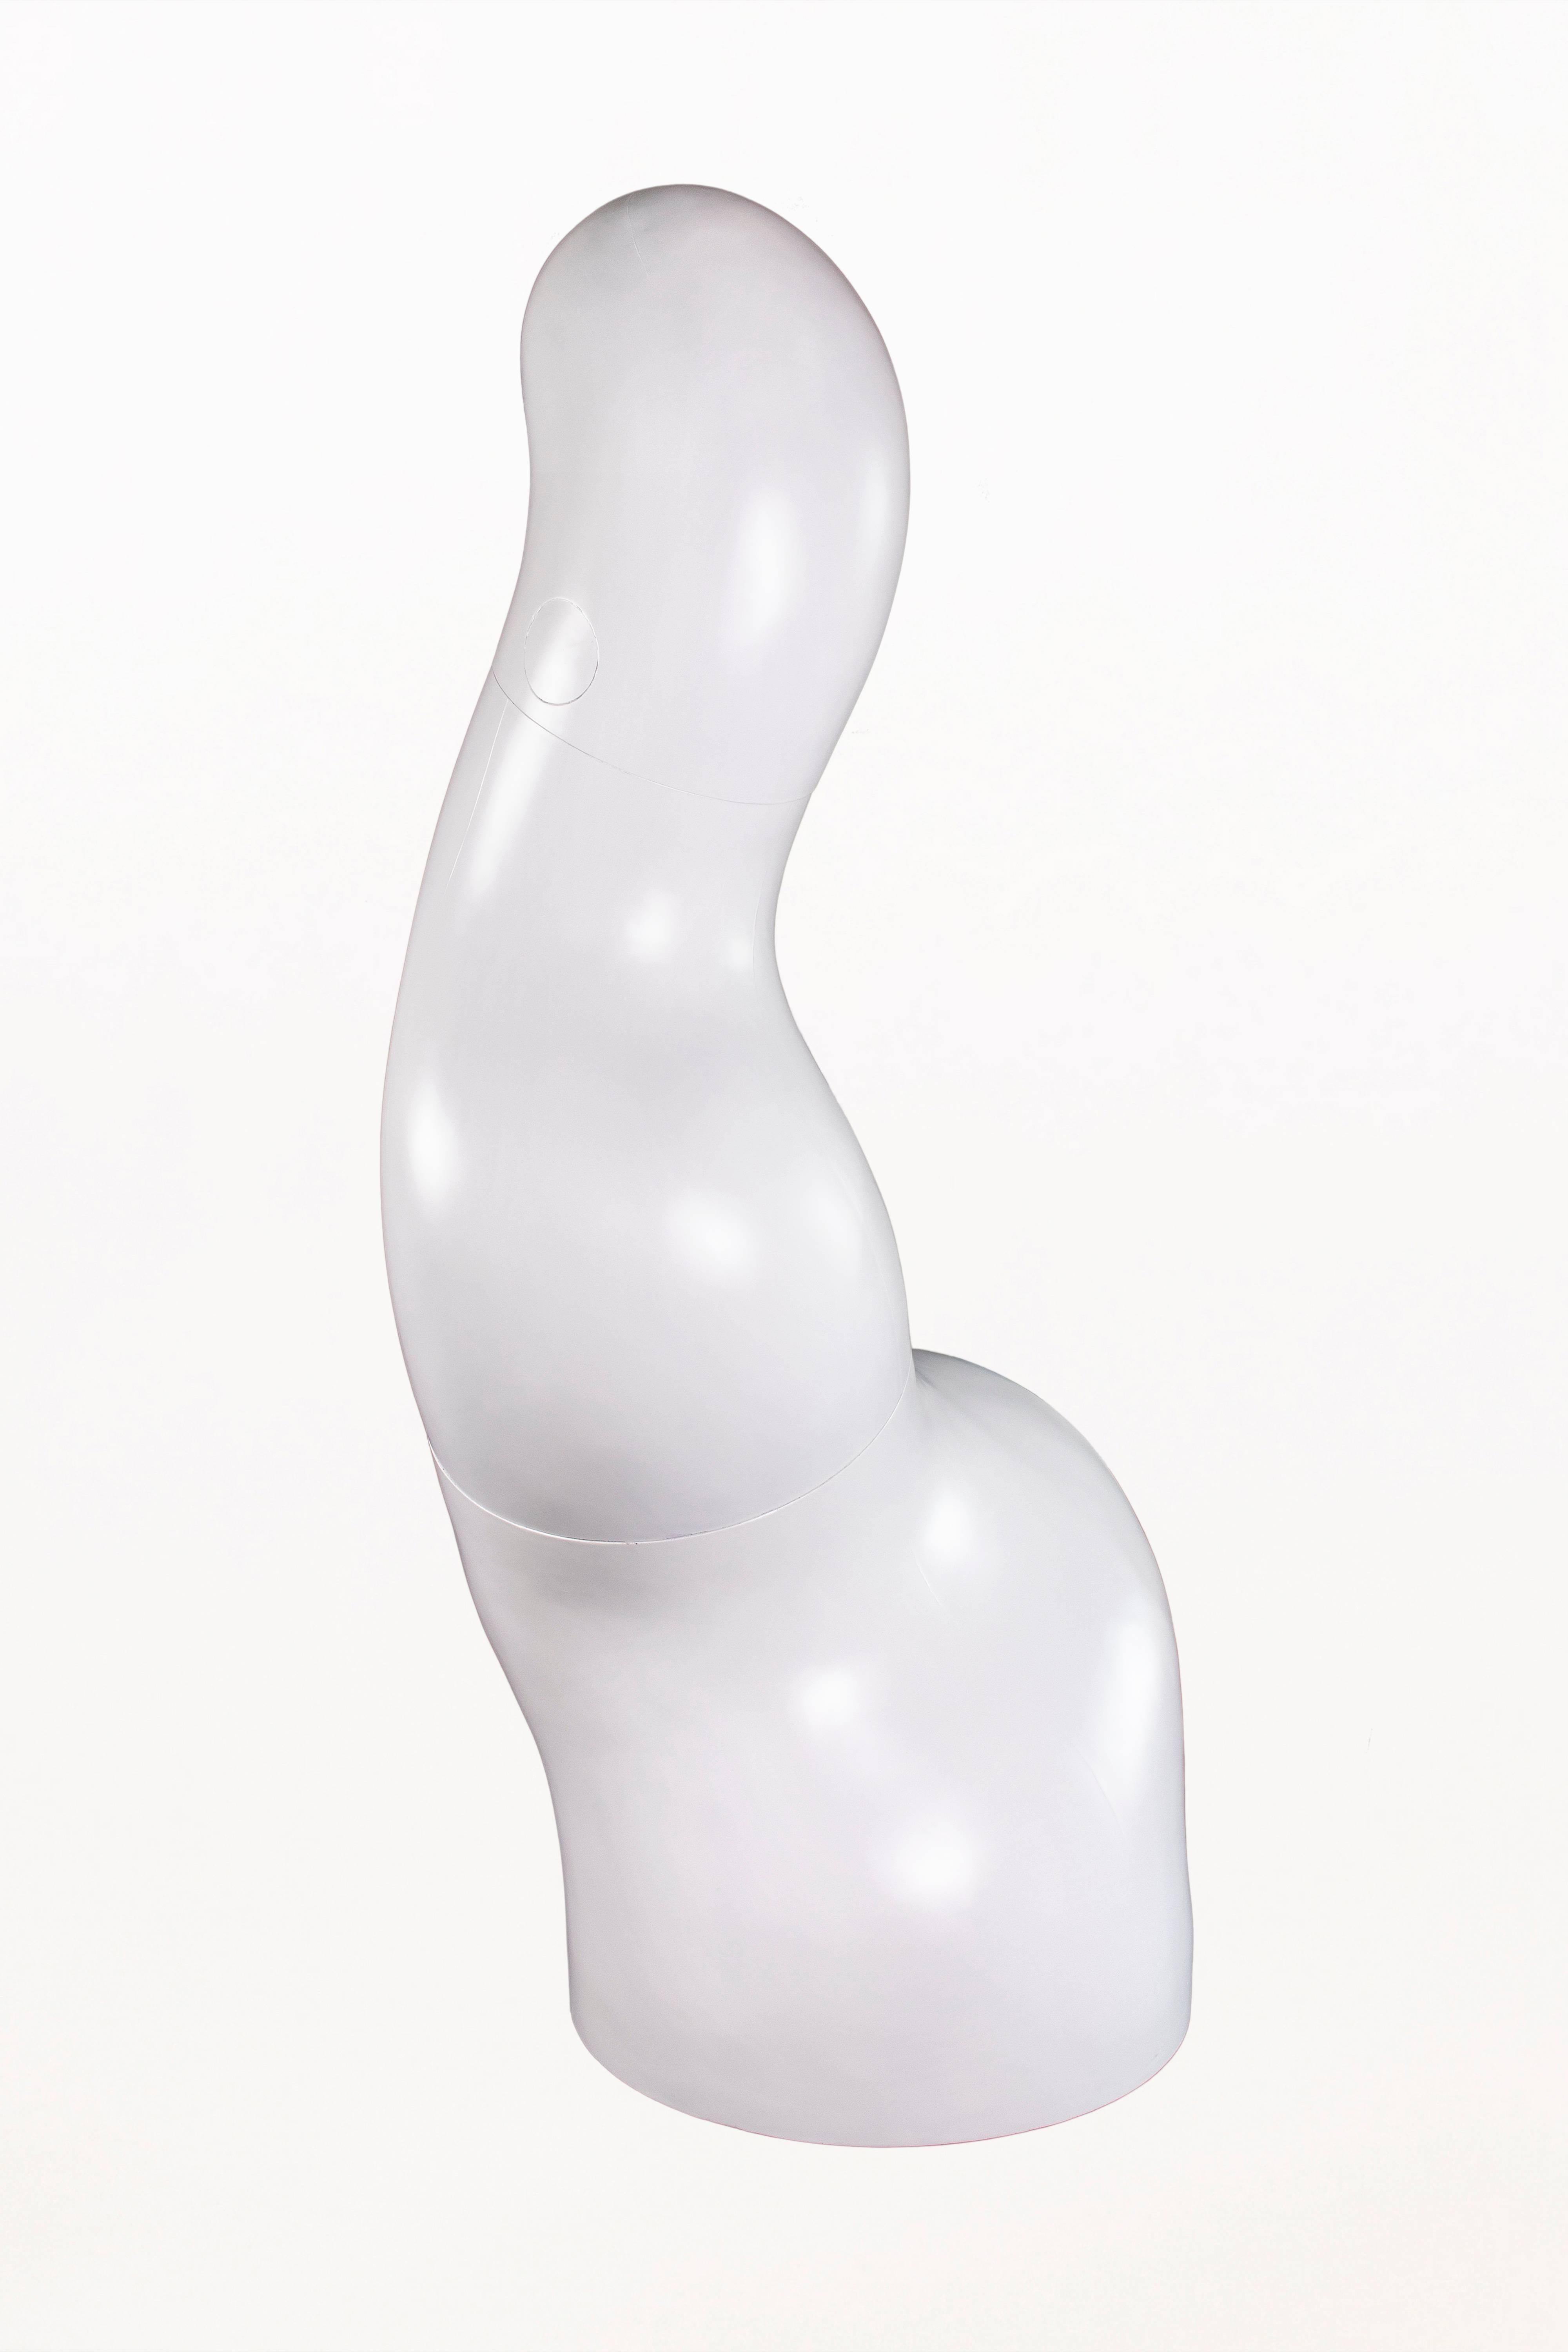 White lacquered polymorphic sculpture by Les Simonnet
Very large sculpture
French artistic couple, Martha and Jean-Marie Simonnet
Lacquered fiberglass,
circa 1968, France.
Very good vintage condition
Jean Marie and Martha Simonnet work and